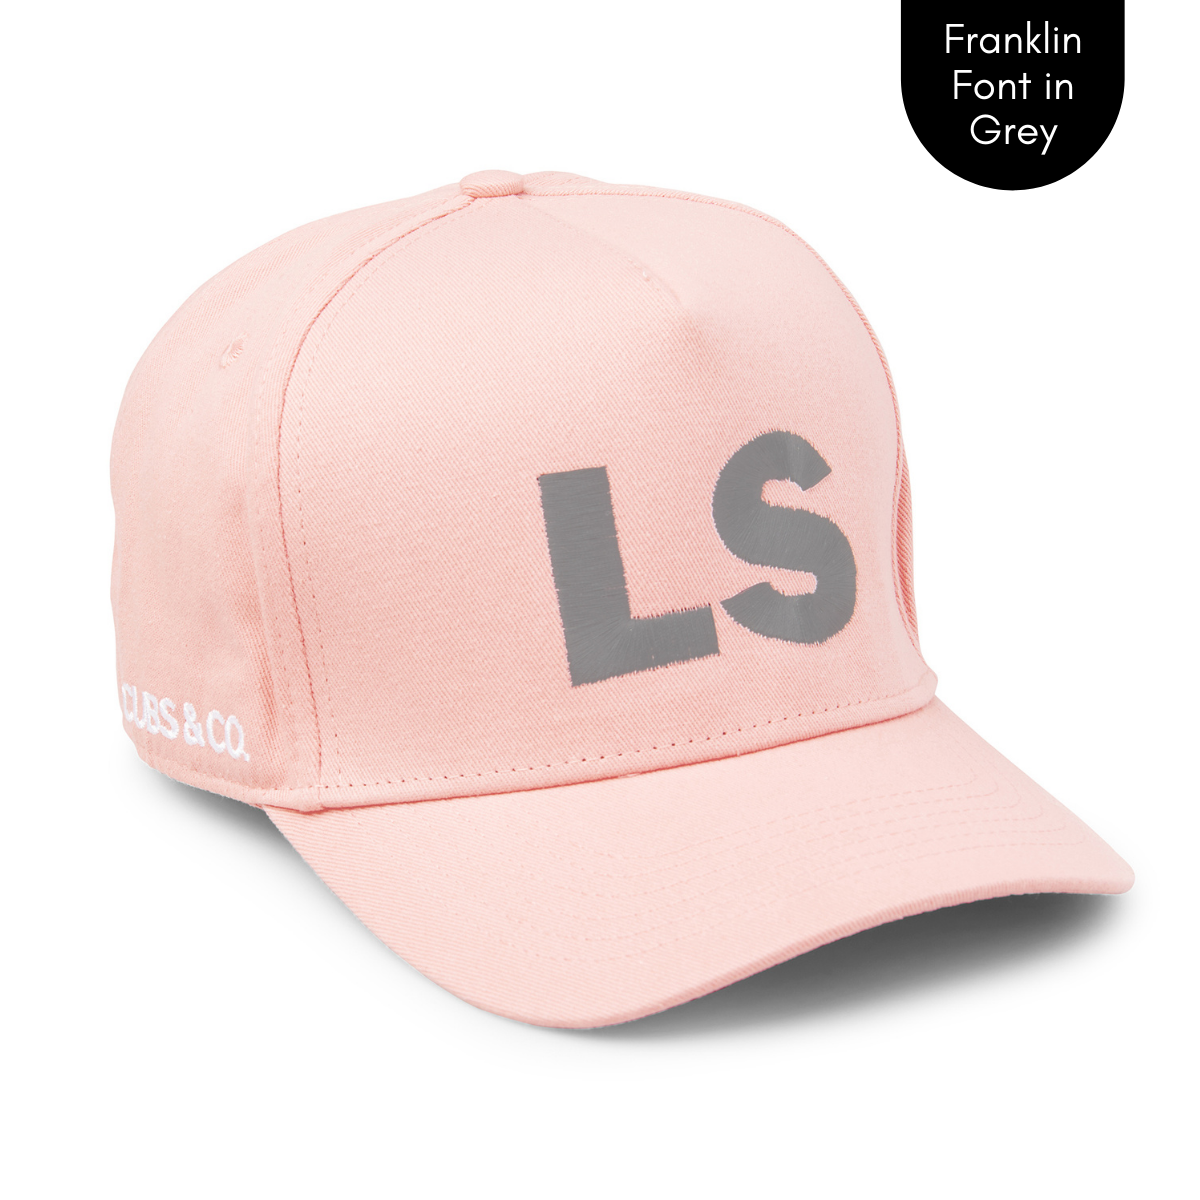 Cubs & Co - PERSONALISED PINK W/ INITIALS | FRANKLIN GREY FONT